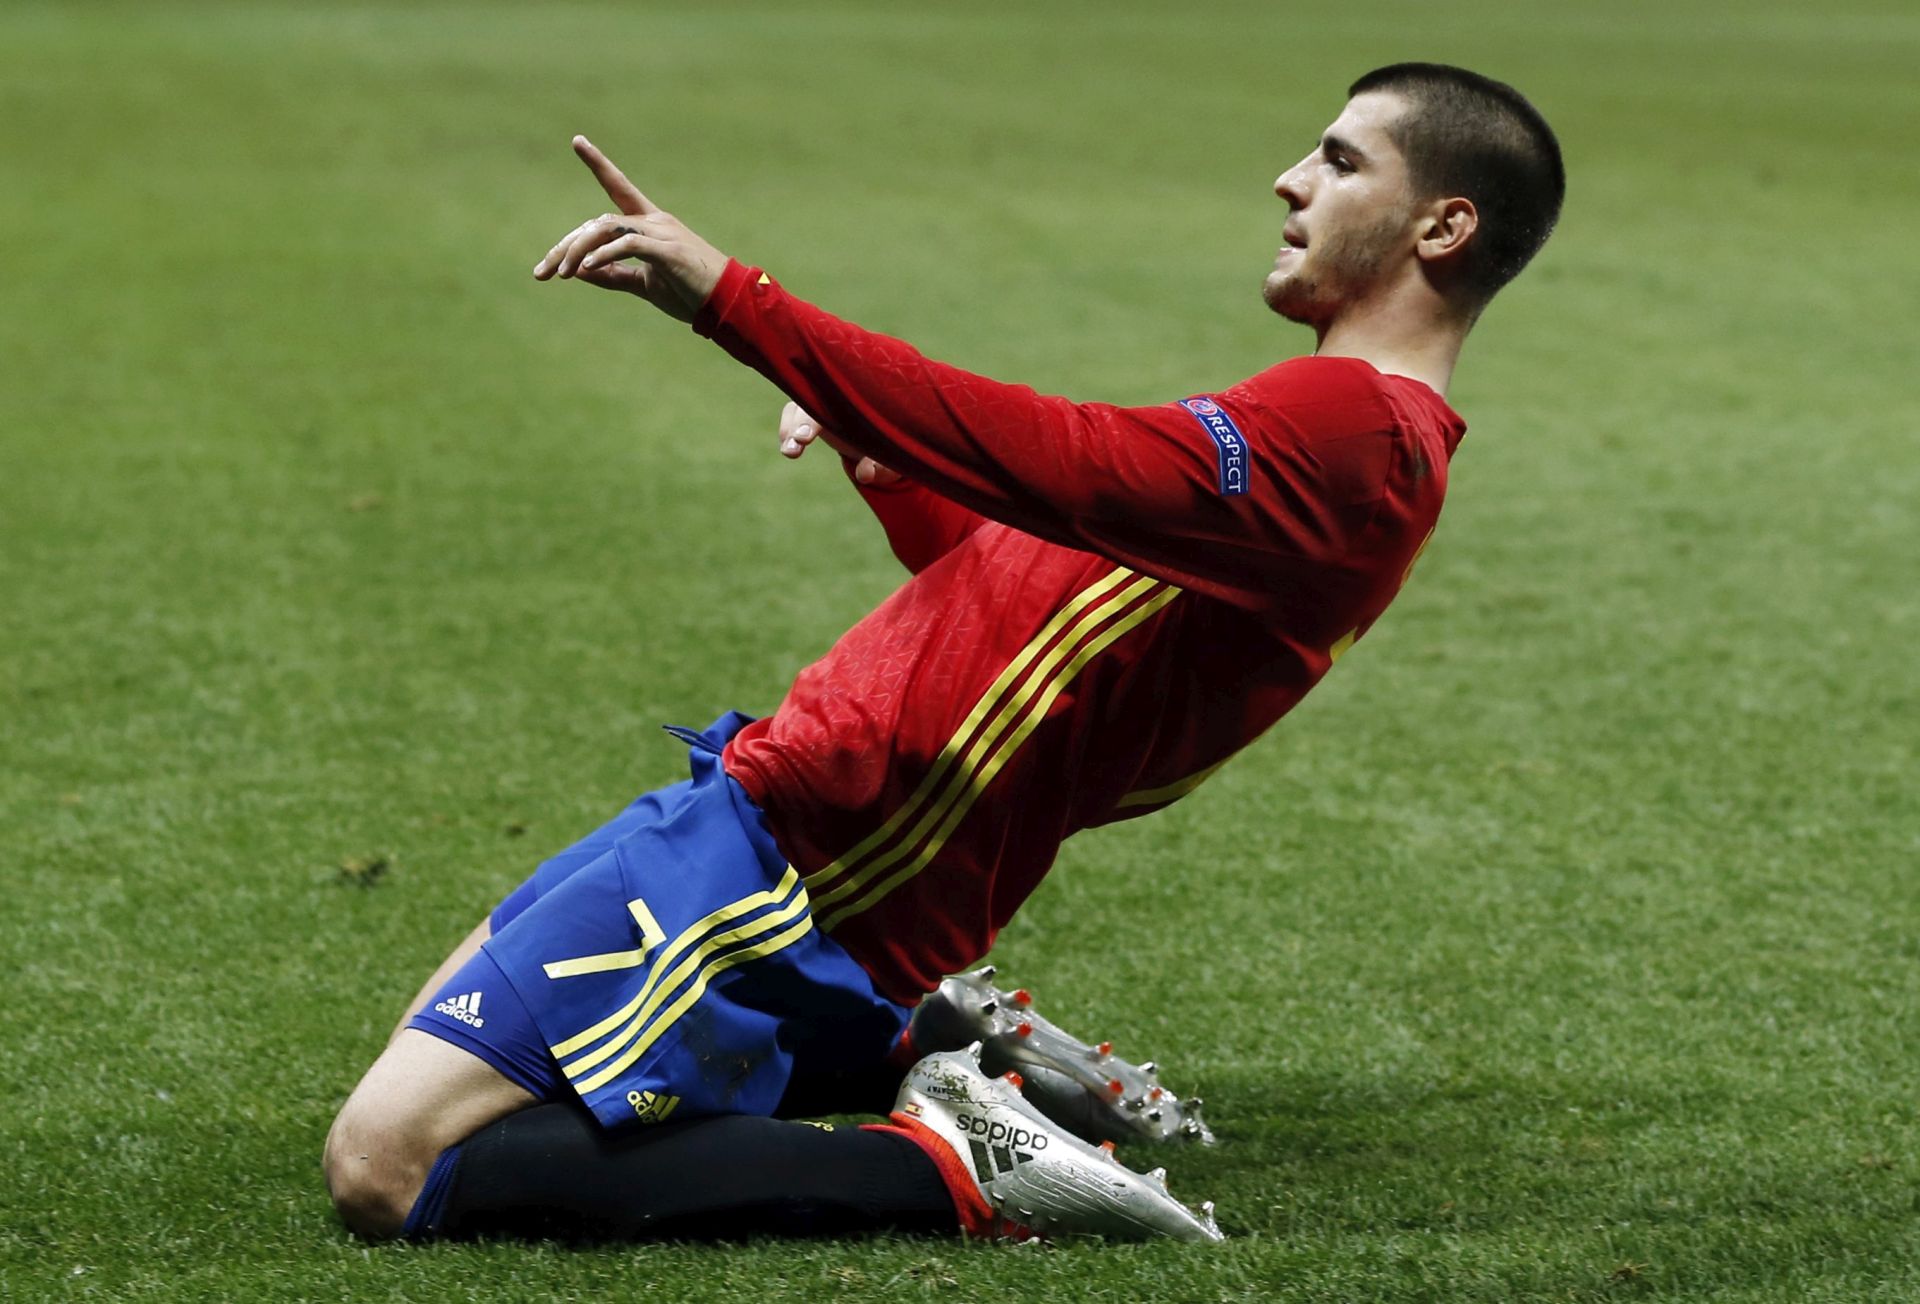 epa05373701 Alvaro Morata of Spain celebrates after scoring the 1-0 goal during the UEFA EURO 2016 group D preliminary round match between Spain and Turkey at Stade de Nice in Nice, France, 17 June 2016.

(RESTRICTIONS APPLY: For editorial news reporting purposes only. Not used for commercial or marketing purposes without prior written approval of UEFA. Images must appear as still images and must not emulate match action video footage. Photographs published in online publications (whether via the Internet or otherwise) shall have an interval of at least 20 seconds between the posting.)  EPA/TOLGA BOZOGLU   EDITORIAL USE ONLY